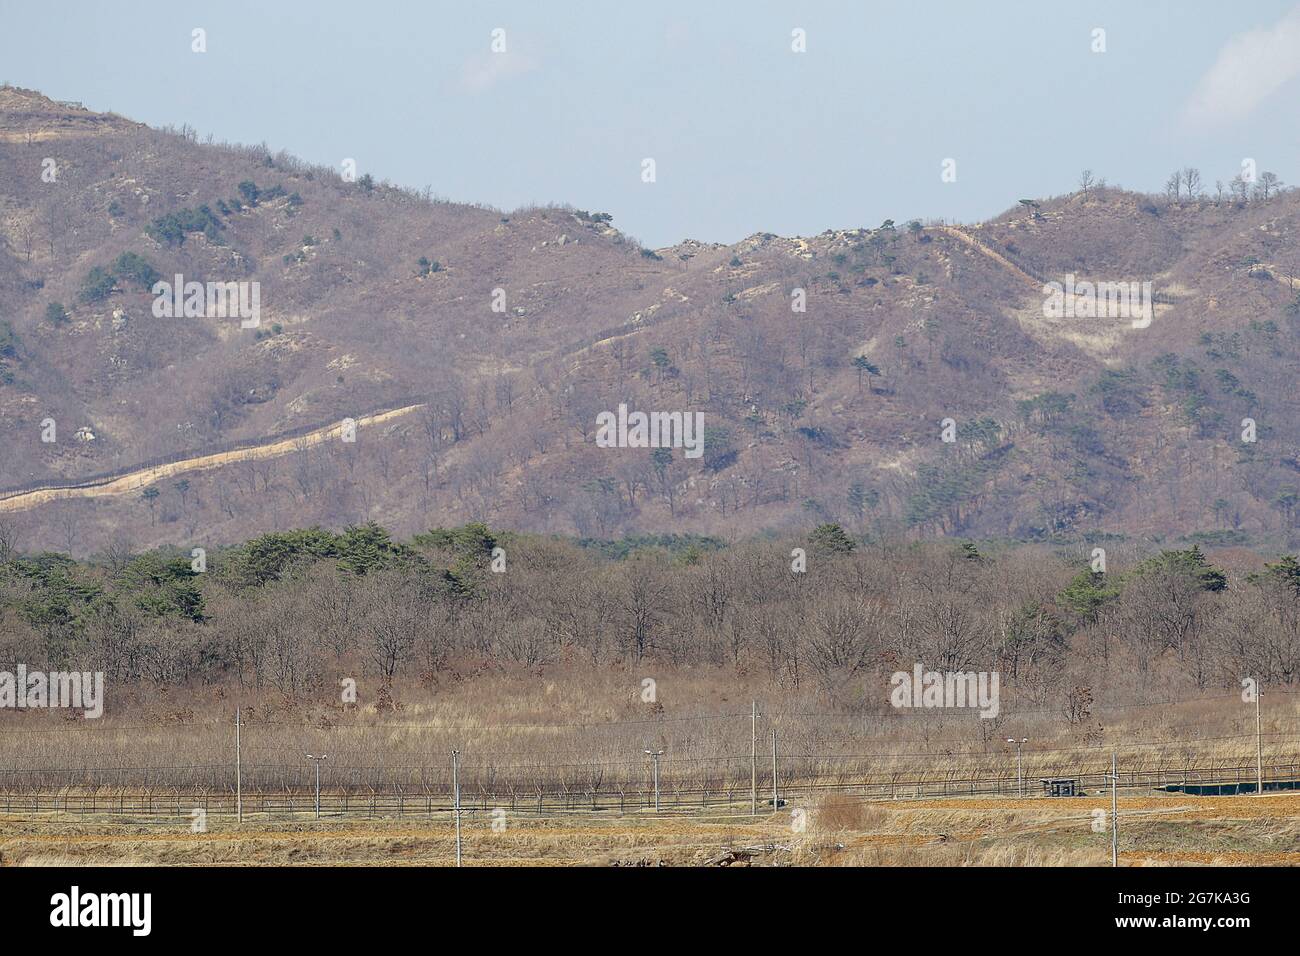 April 11, 2018-Goyang, South Korea-A View of Korean War battle of white horse and the Civilian Control Line in Cheorwon, South Korea. The Battle of White Horse was another in a series of bloody battles for dominant hilltop positions during the Korean War. Baengma-goji was a 395-metre (1,296 ft) hill in the Iron Triangle, formed by Pyonggang at its peak and Gimhwa-eup and Cheorwon at its base, was a strategic transportation route in the central region of the Korean peninsula. White Horse was the crest of a forested hill mass that extended in a northwest-to-southeast direction for about two mile Stock Photo